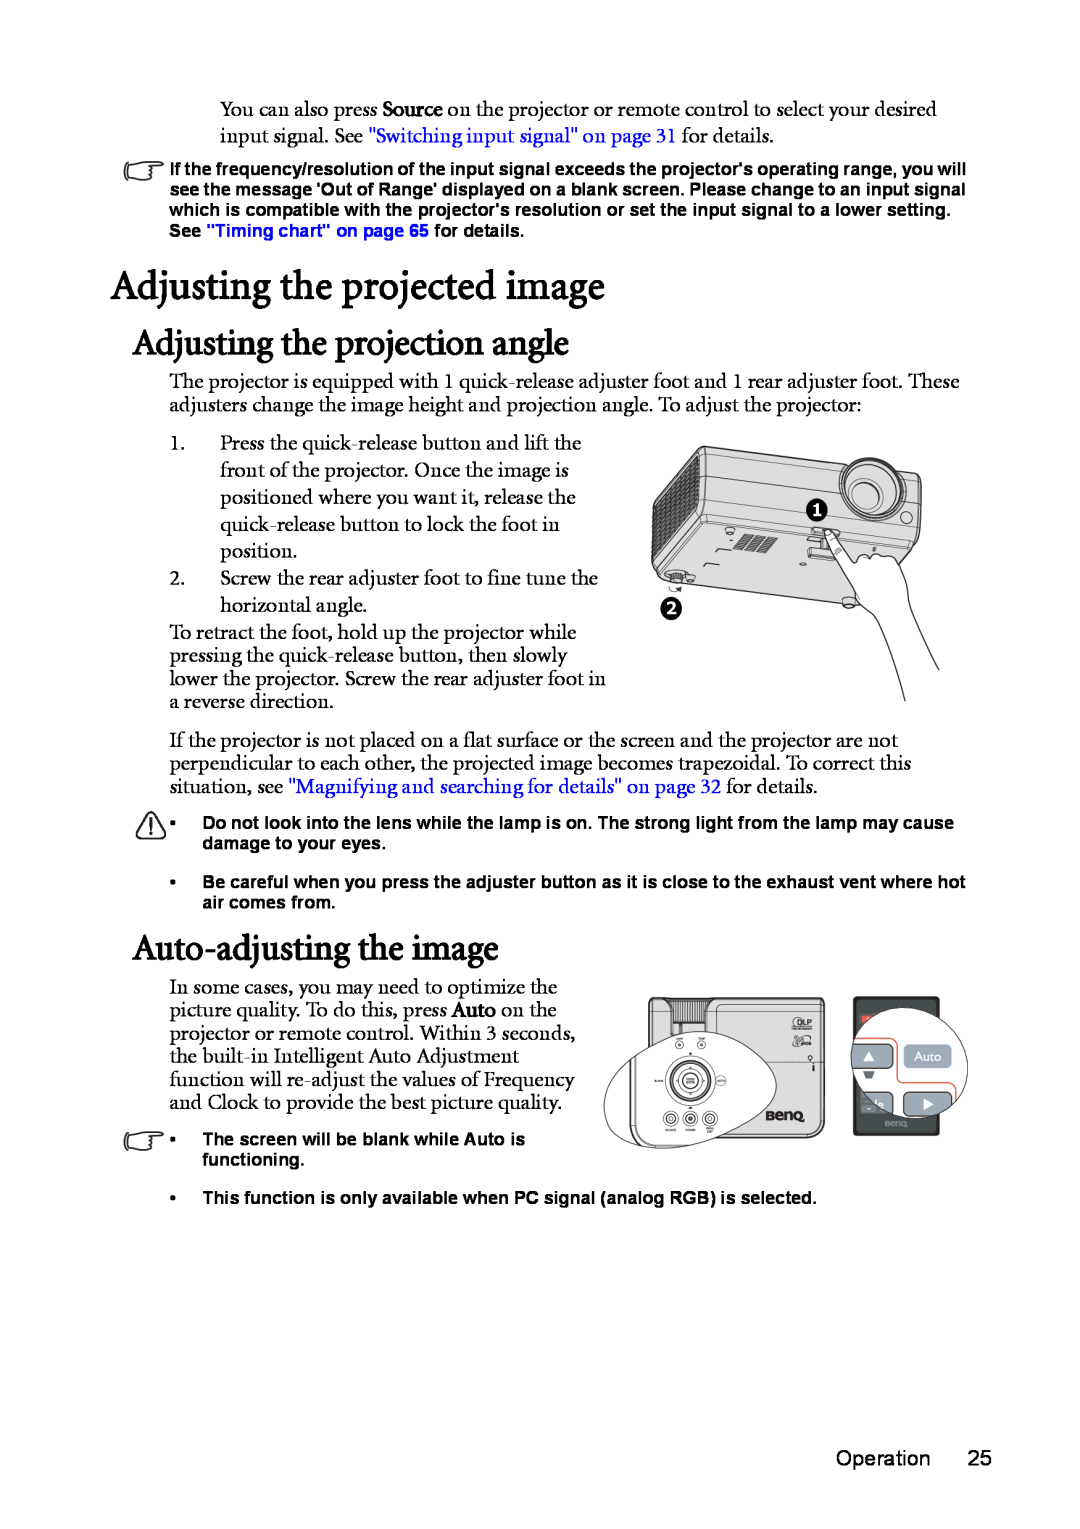 BenQ MX511 Adjusting the projected image, Adjusting the projection angle, Auto-adjusting the image, horizontal angle 